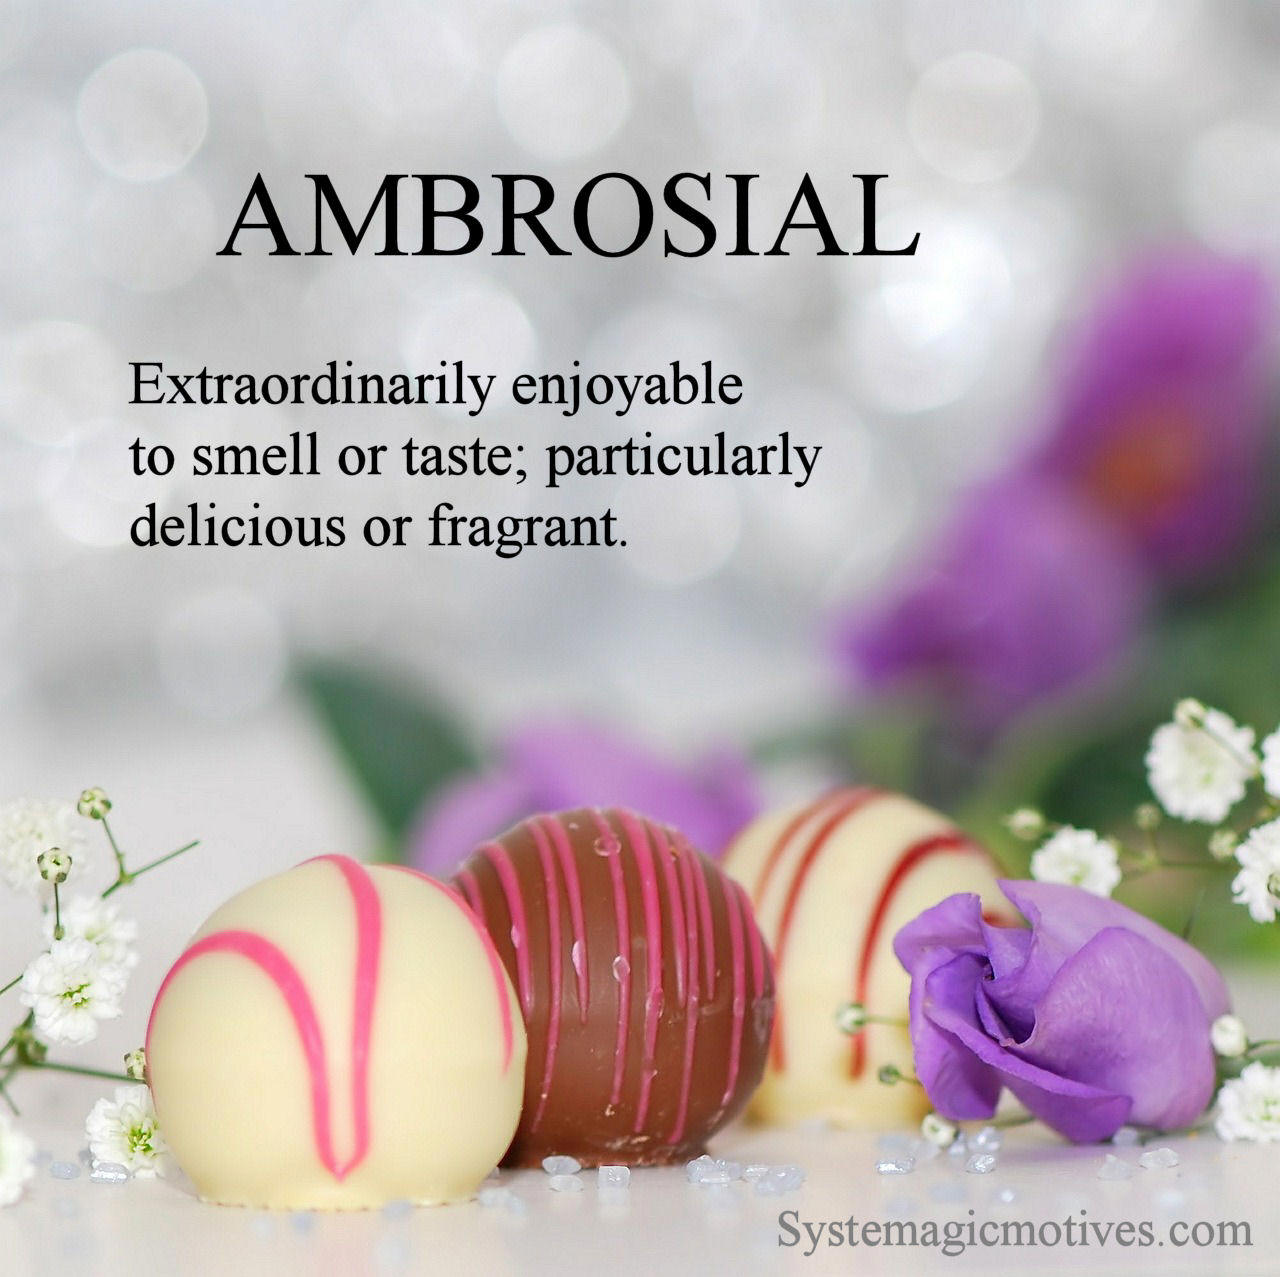 Graphic Definition of Ambrosial/Ambrosian